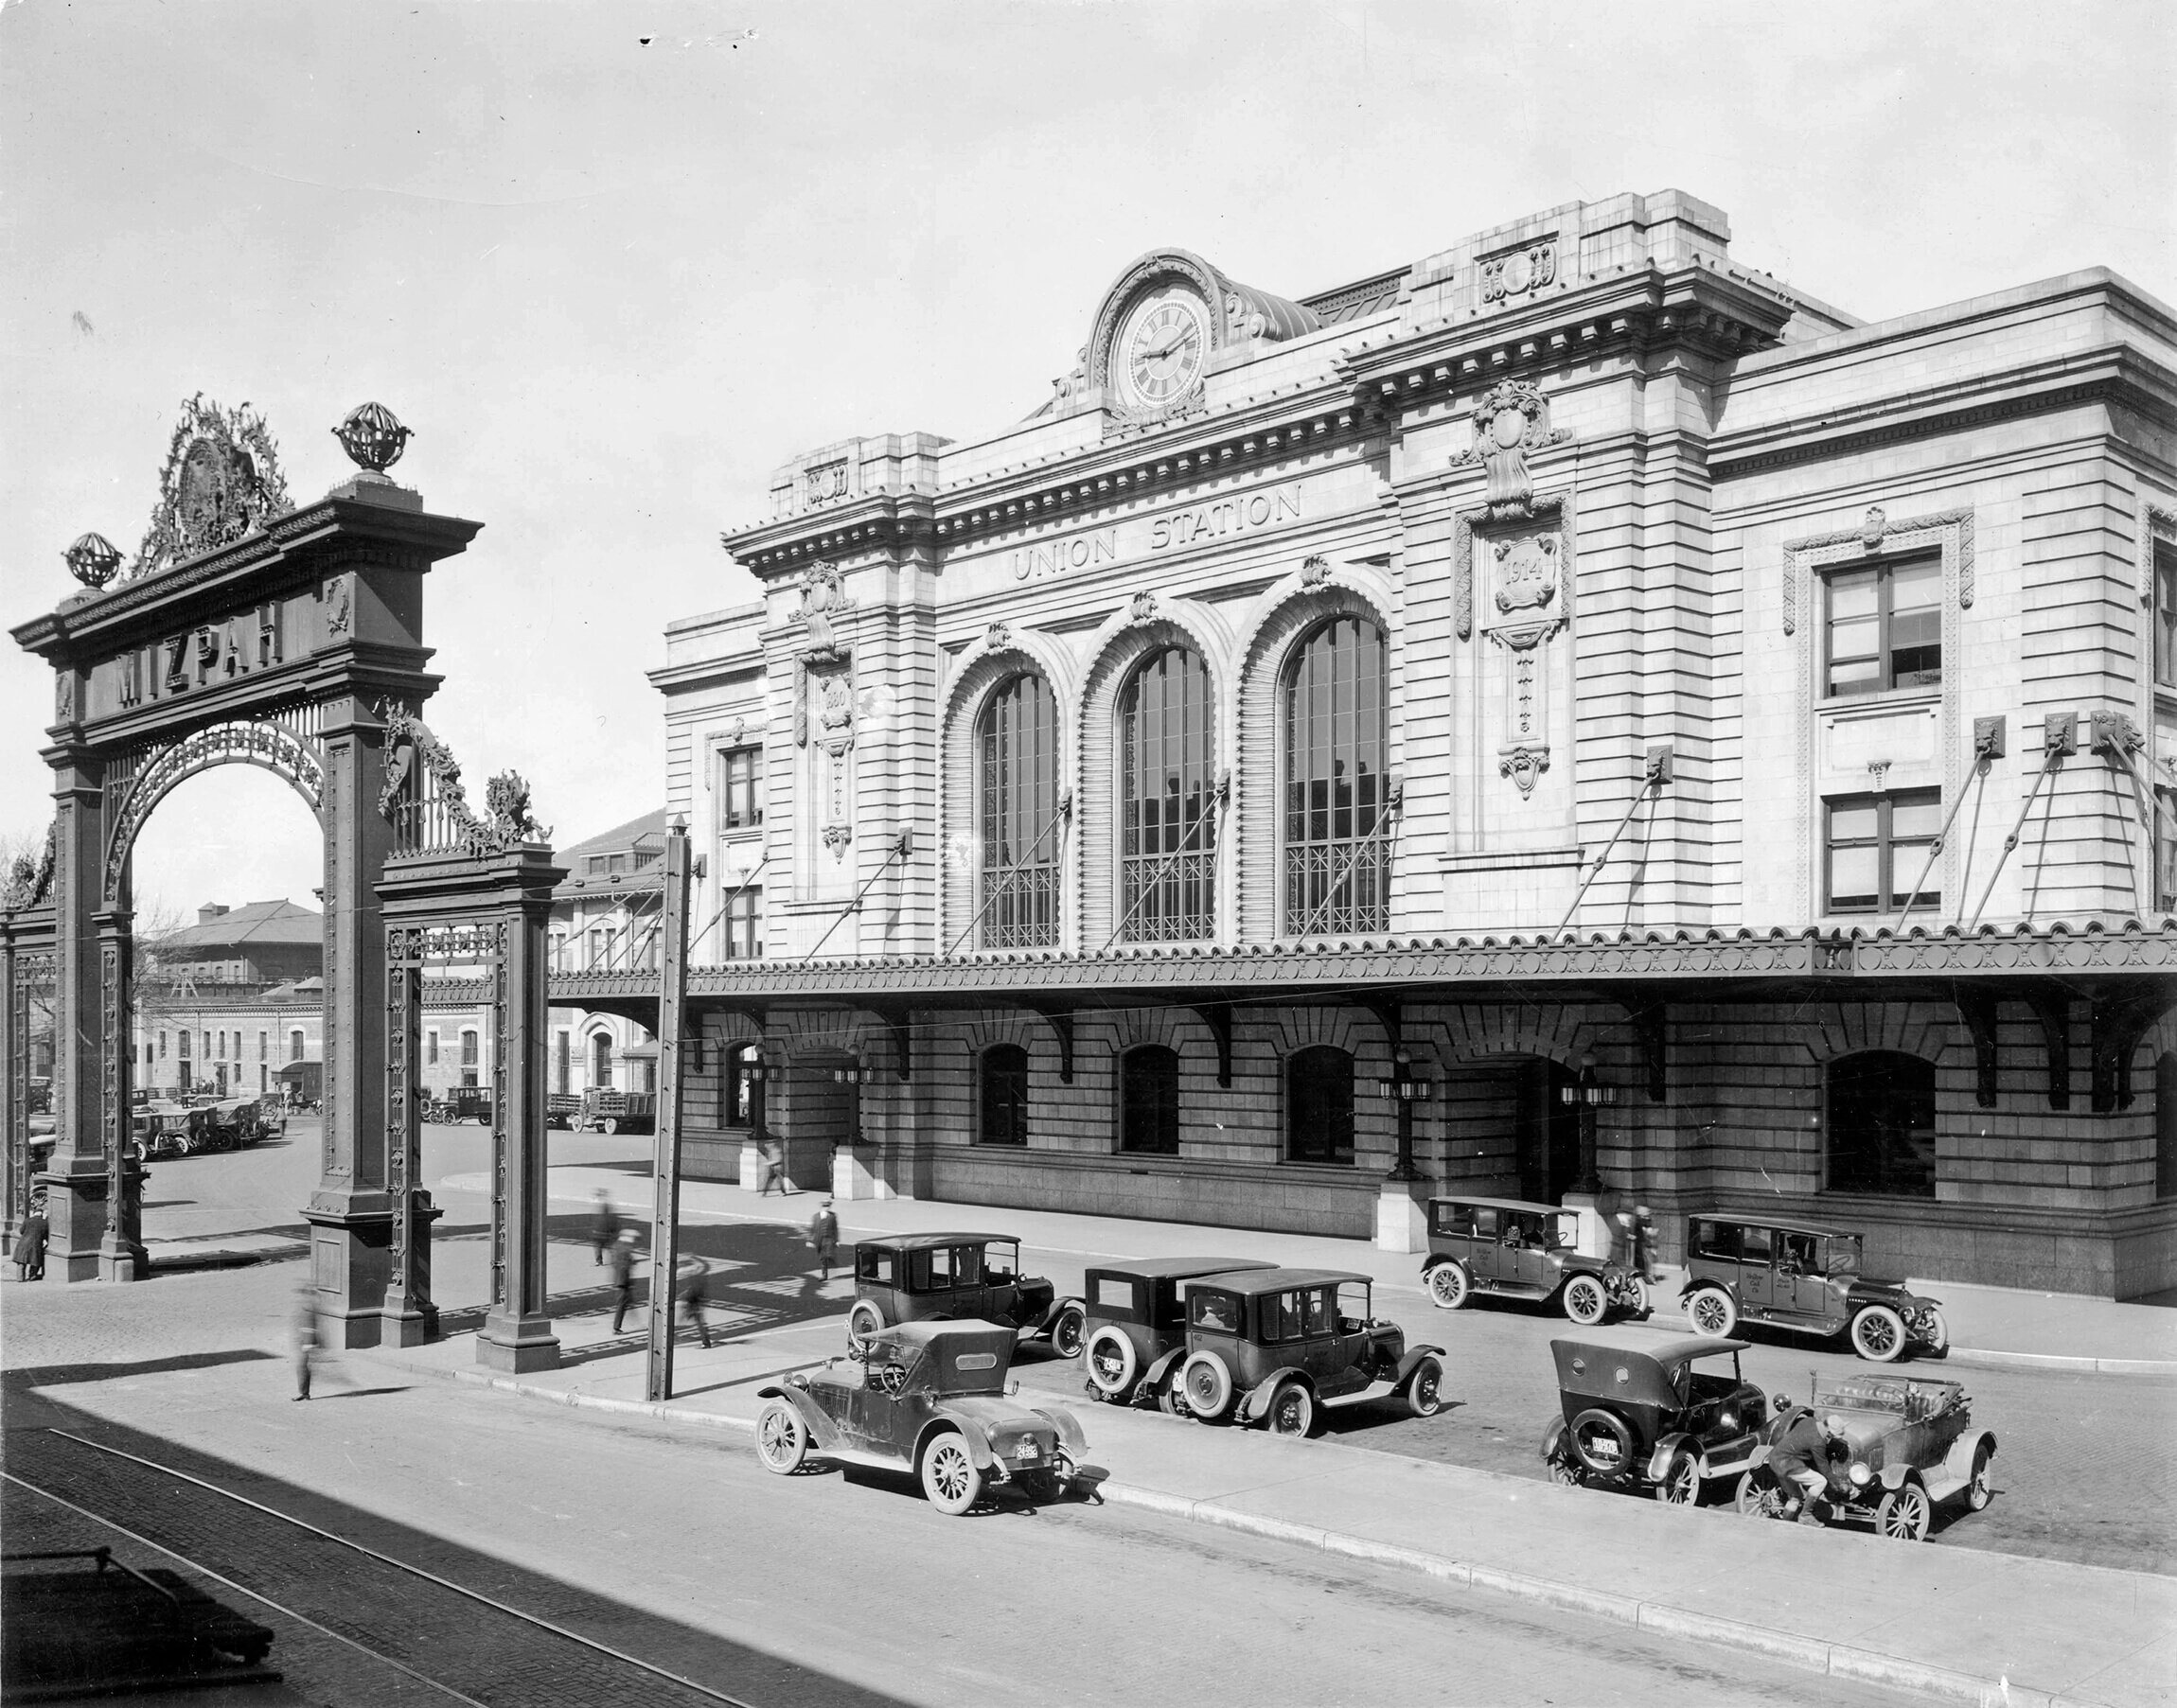 A historical photo of Union Station in Denver, Colorado.